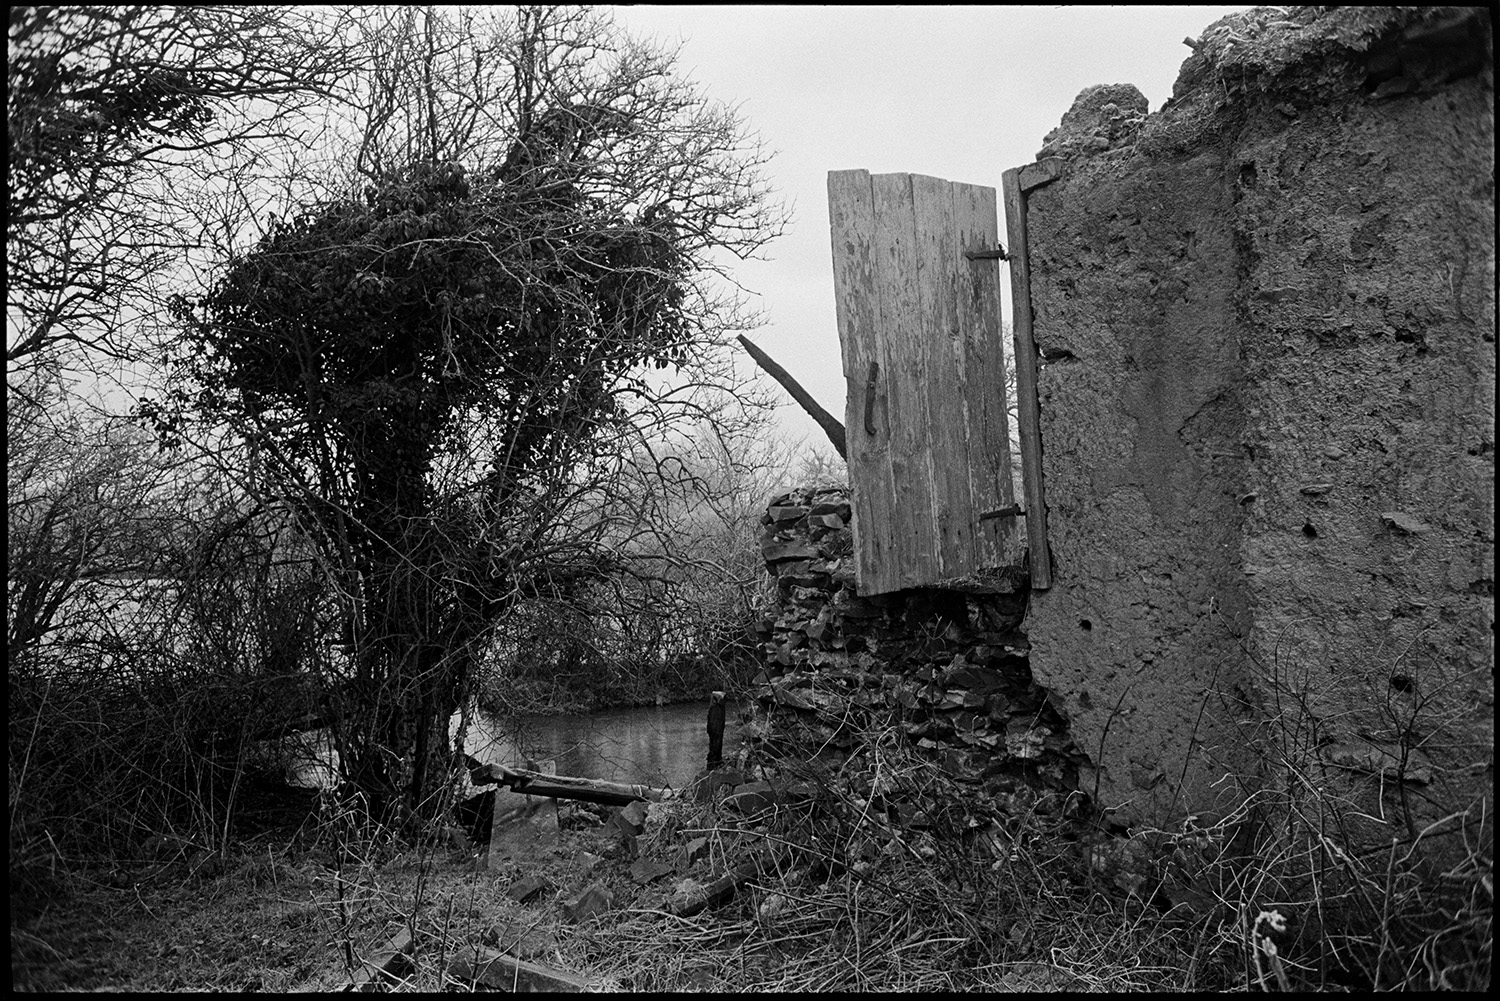 Collapsed cob and thatch barns.
[Collapsed cob and thatch barn at Middle Week, Iddesleigh, with a cob wall which still has a wooden door attached to it hanging from it's hinges. Behind the building can be seen a river.]